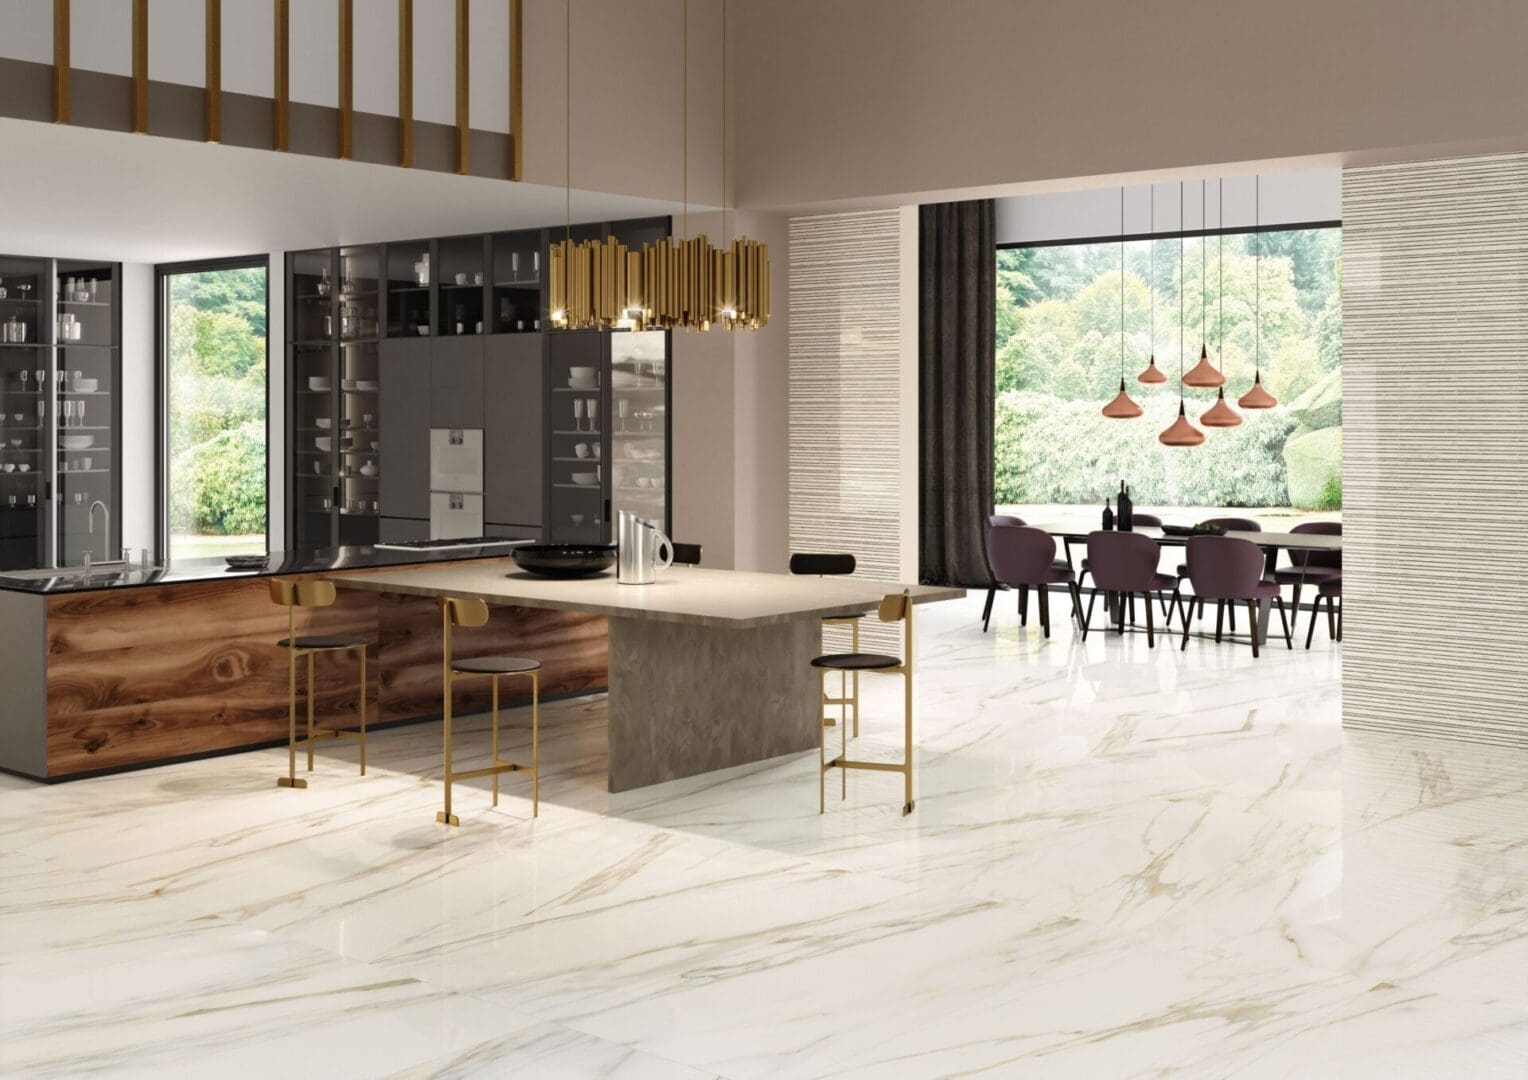 marble flooring in the kitchen and living area